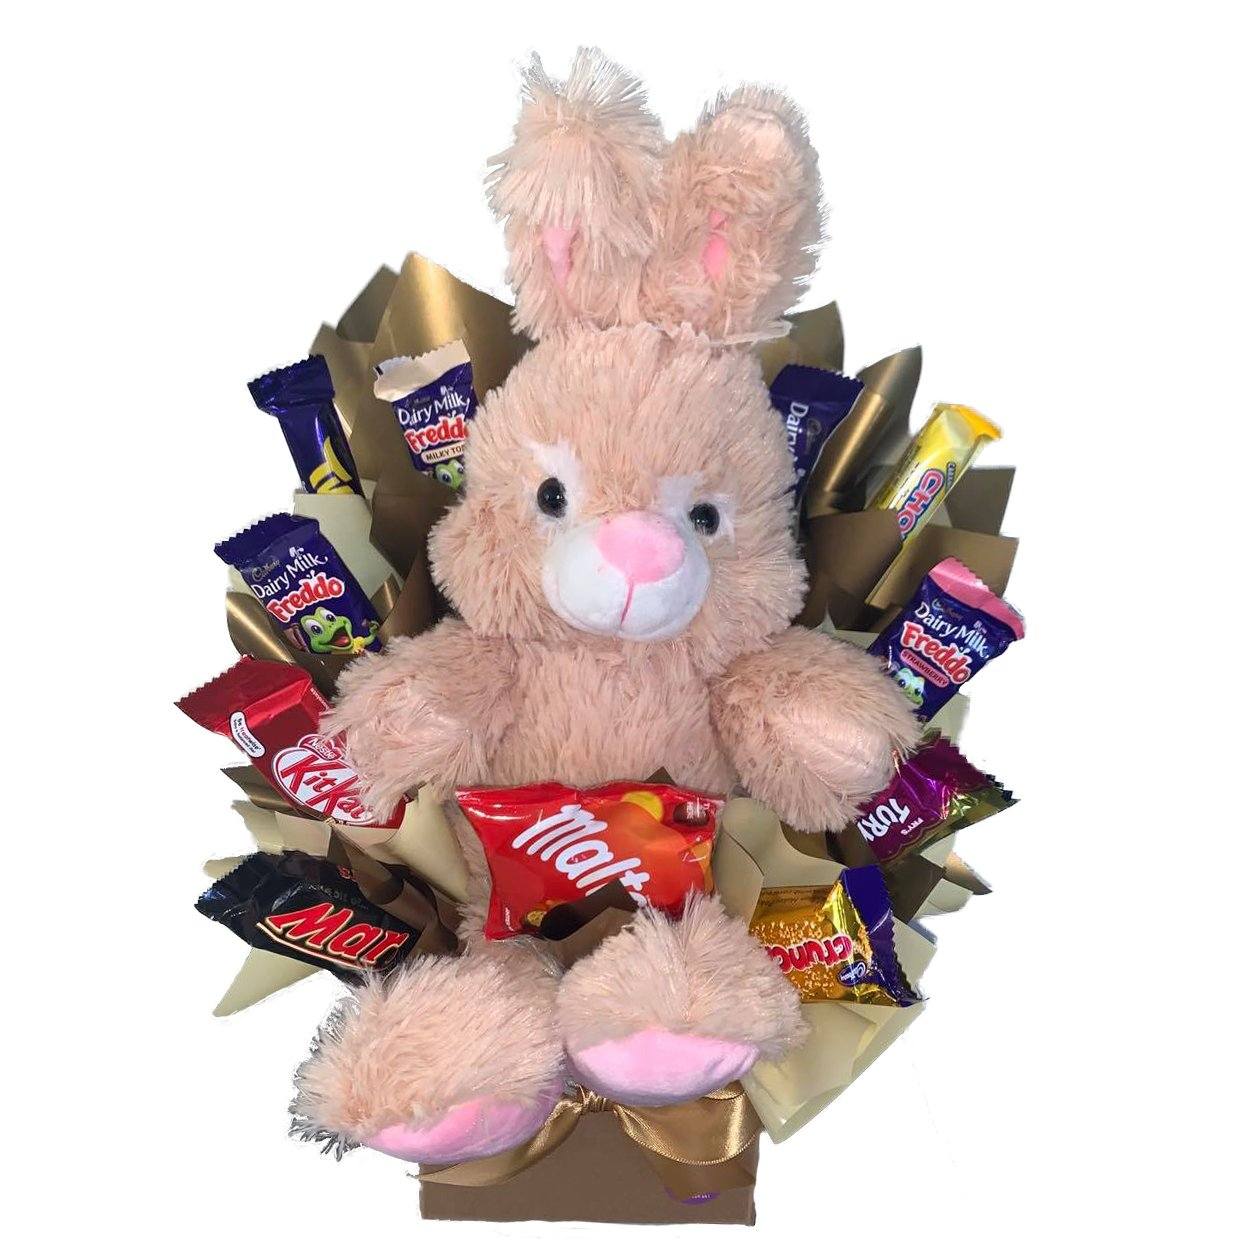 25cm plush bunny sitting in posy box with Nestle and Cadbury chocolates by Lollylicious